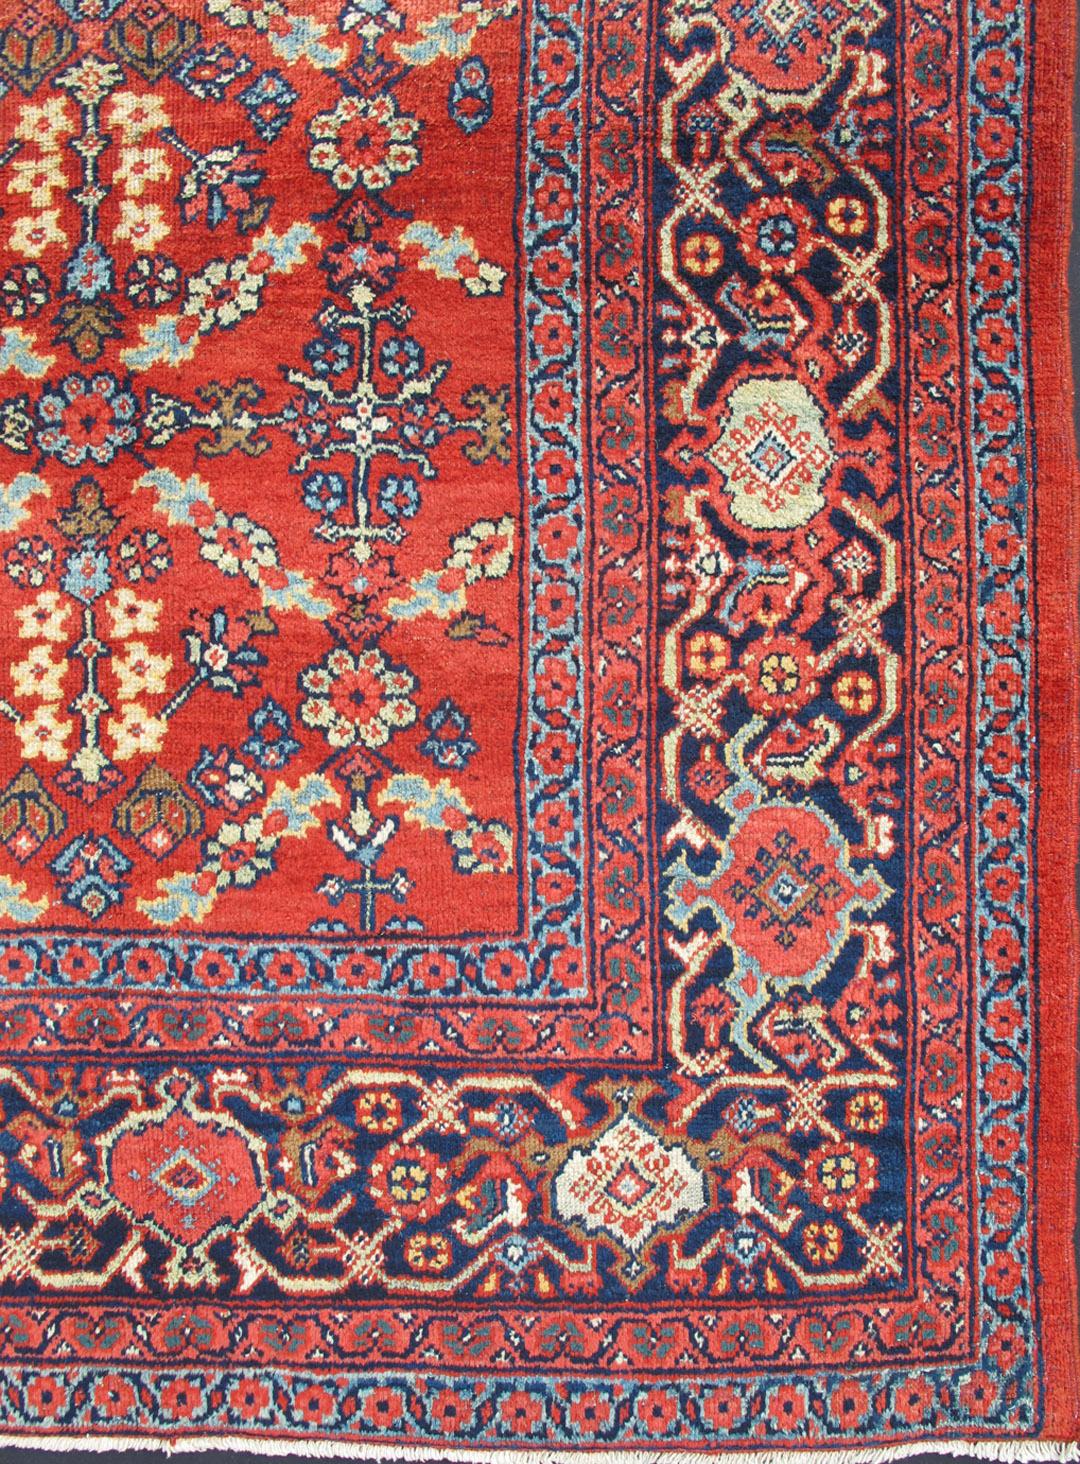 Square Size Geometric Antique Persian Mahal-Sultanabad Rug in Red and Blue Colo In Good Condition For Sale In Atlanta, GA